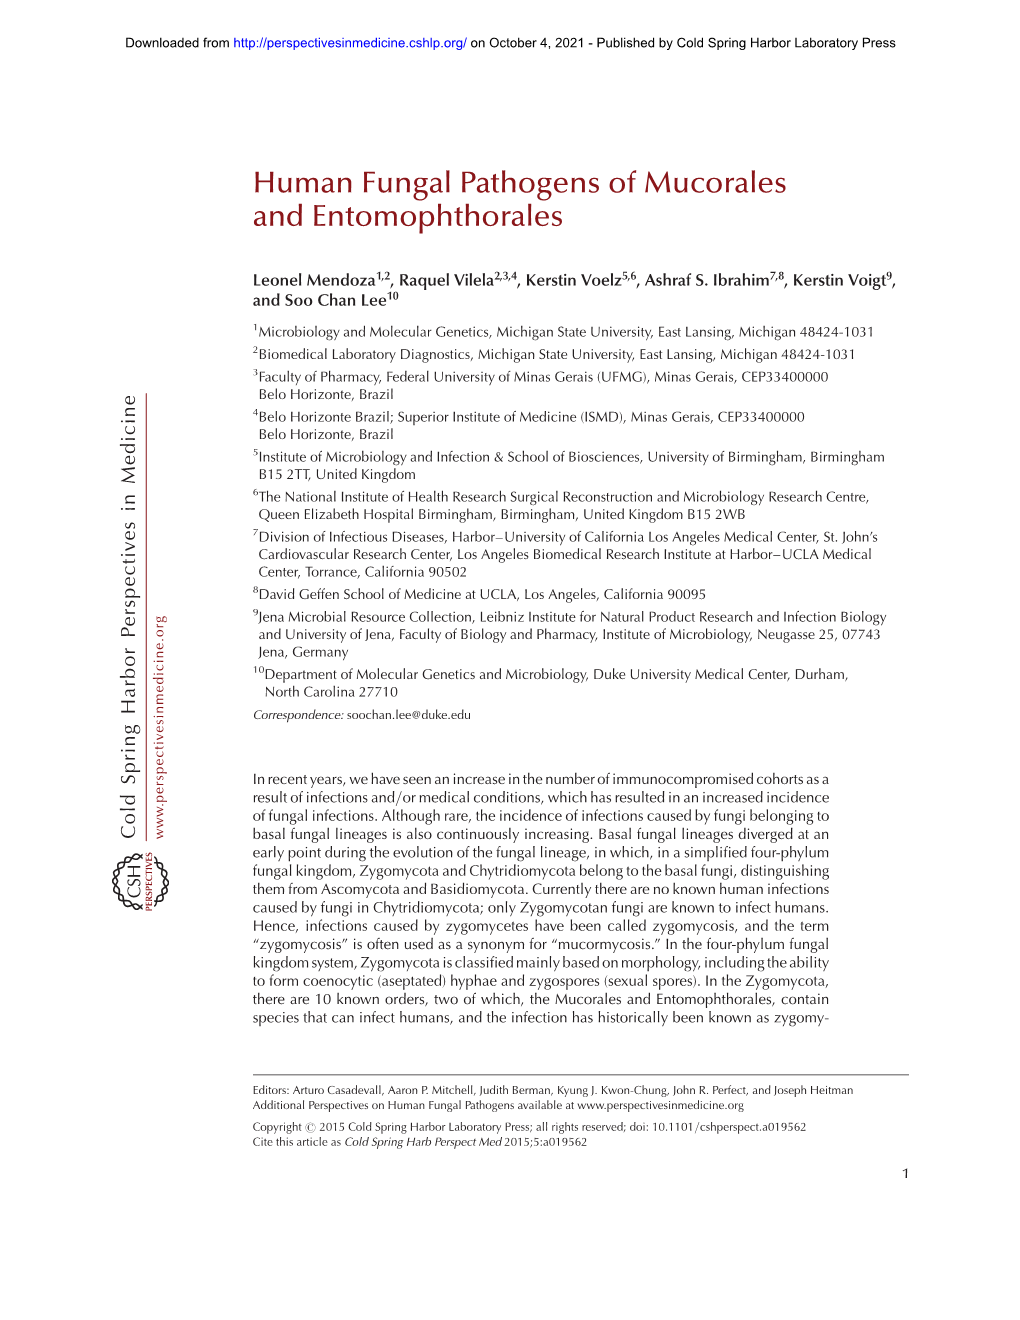 Human Fungal Pathogens of Mucorales and Entomophthorales